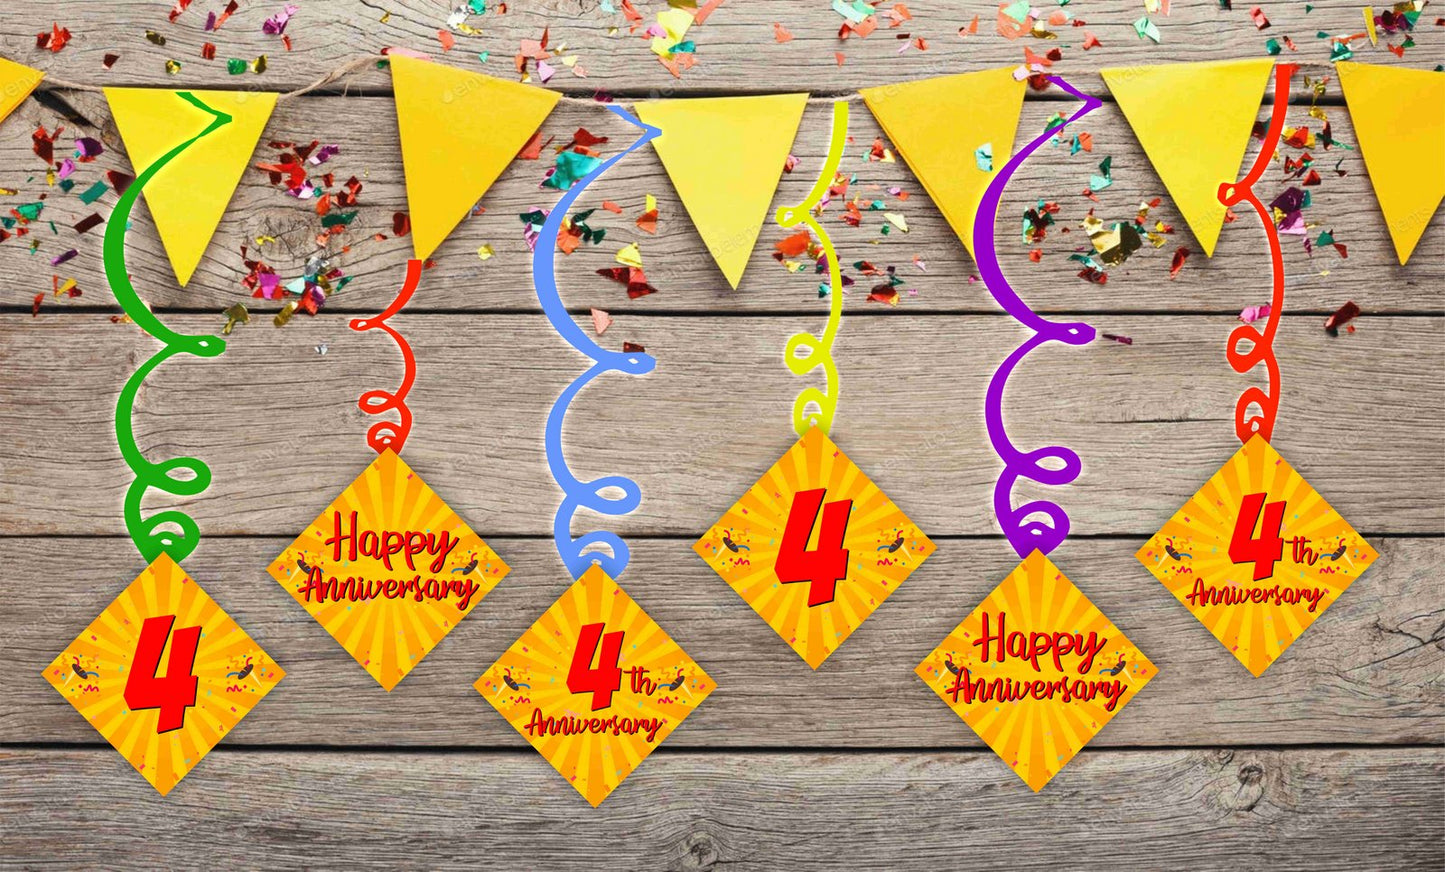 4th Anniversary Ceiling Hanging Swirls Decorations Cutout Festive Party Supplies (Pack of 6 swirls and cutout)